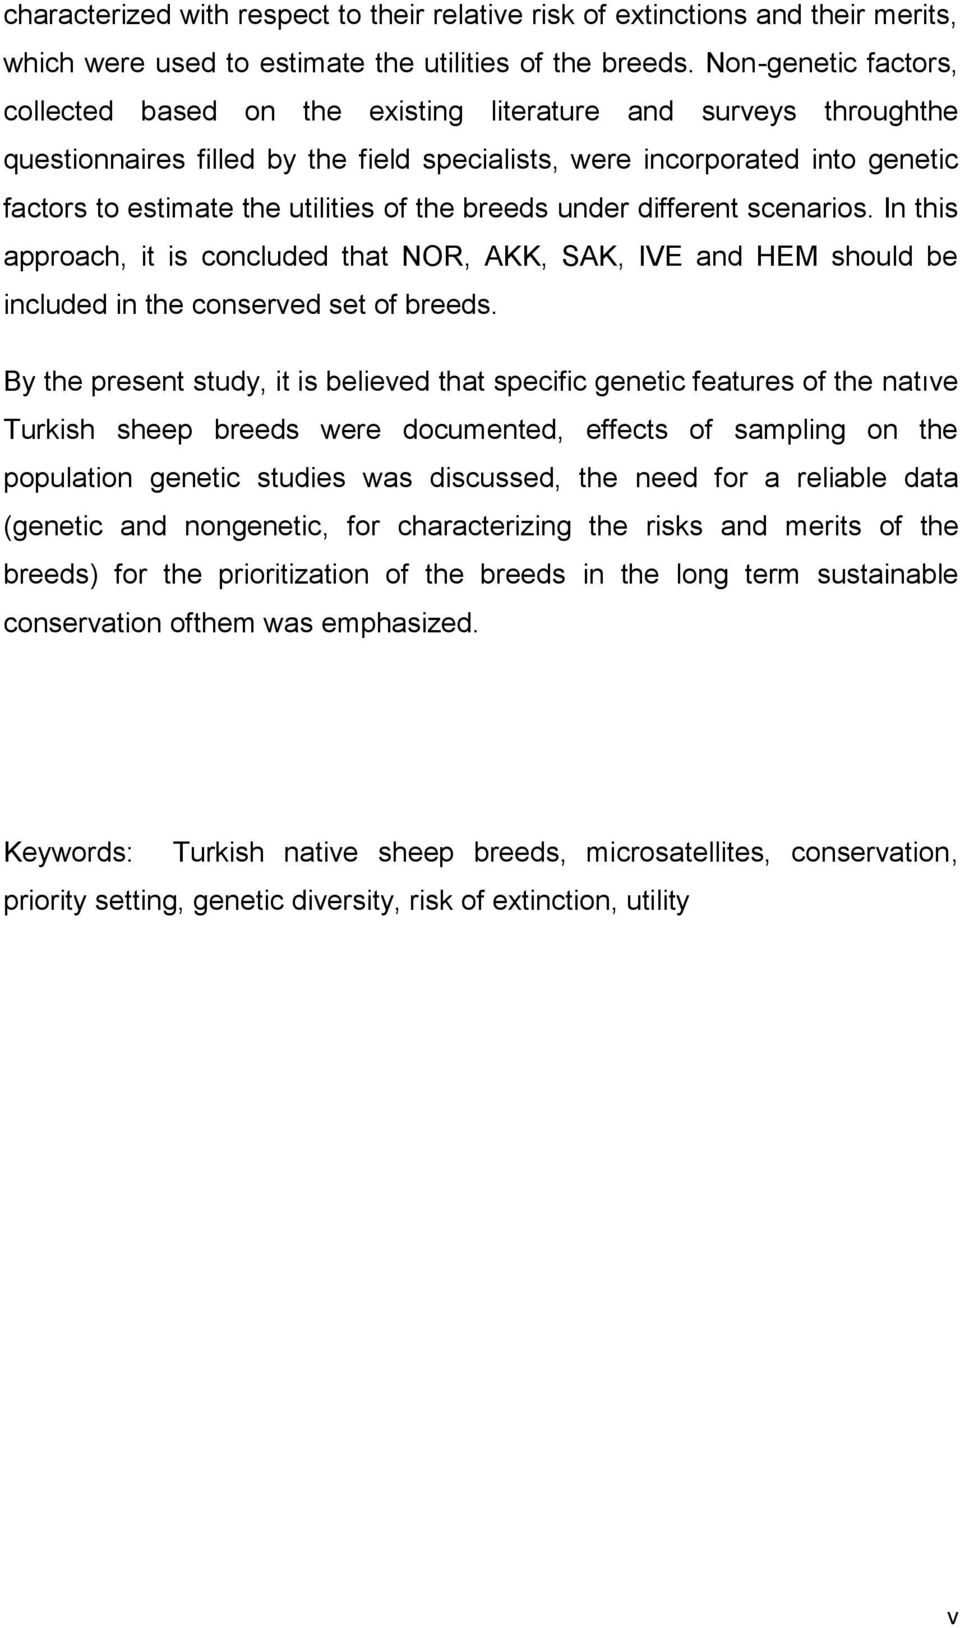 of the breeds under different scenarios. In this approach, it is concluded that NOR, AKK, SAK, IVE and HEM should be included in the conserved set of breeds.